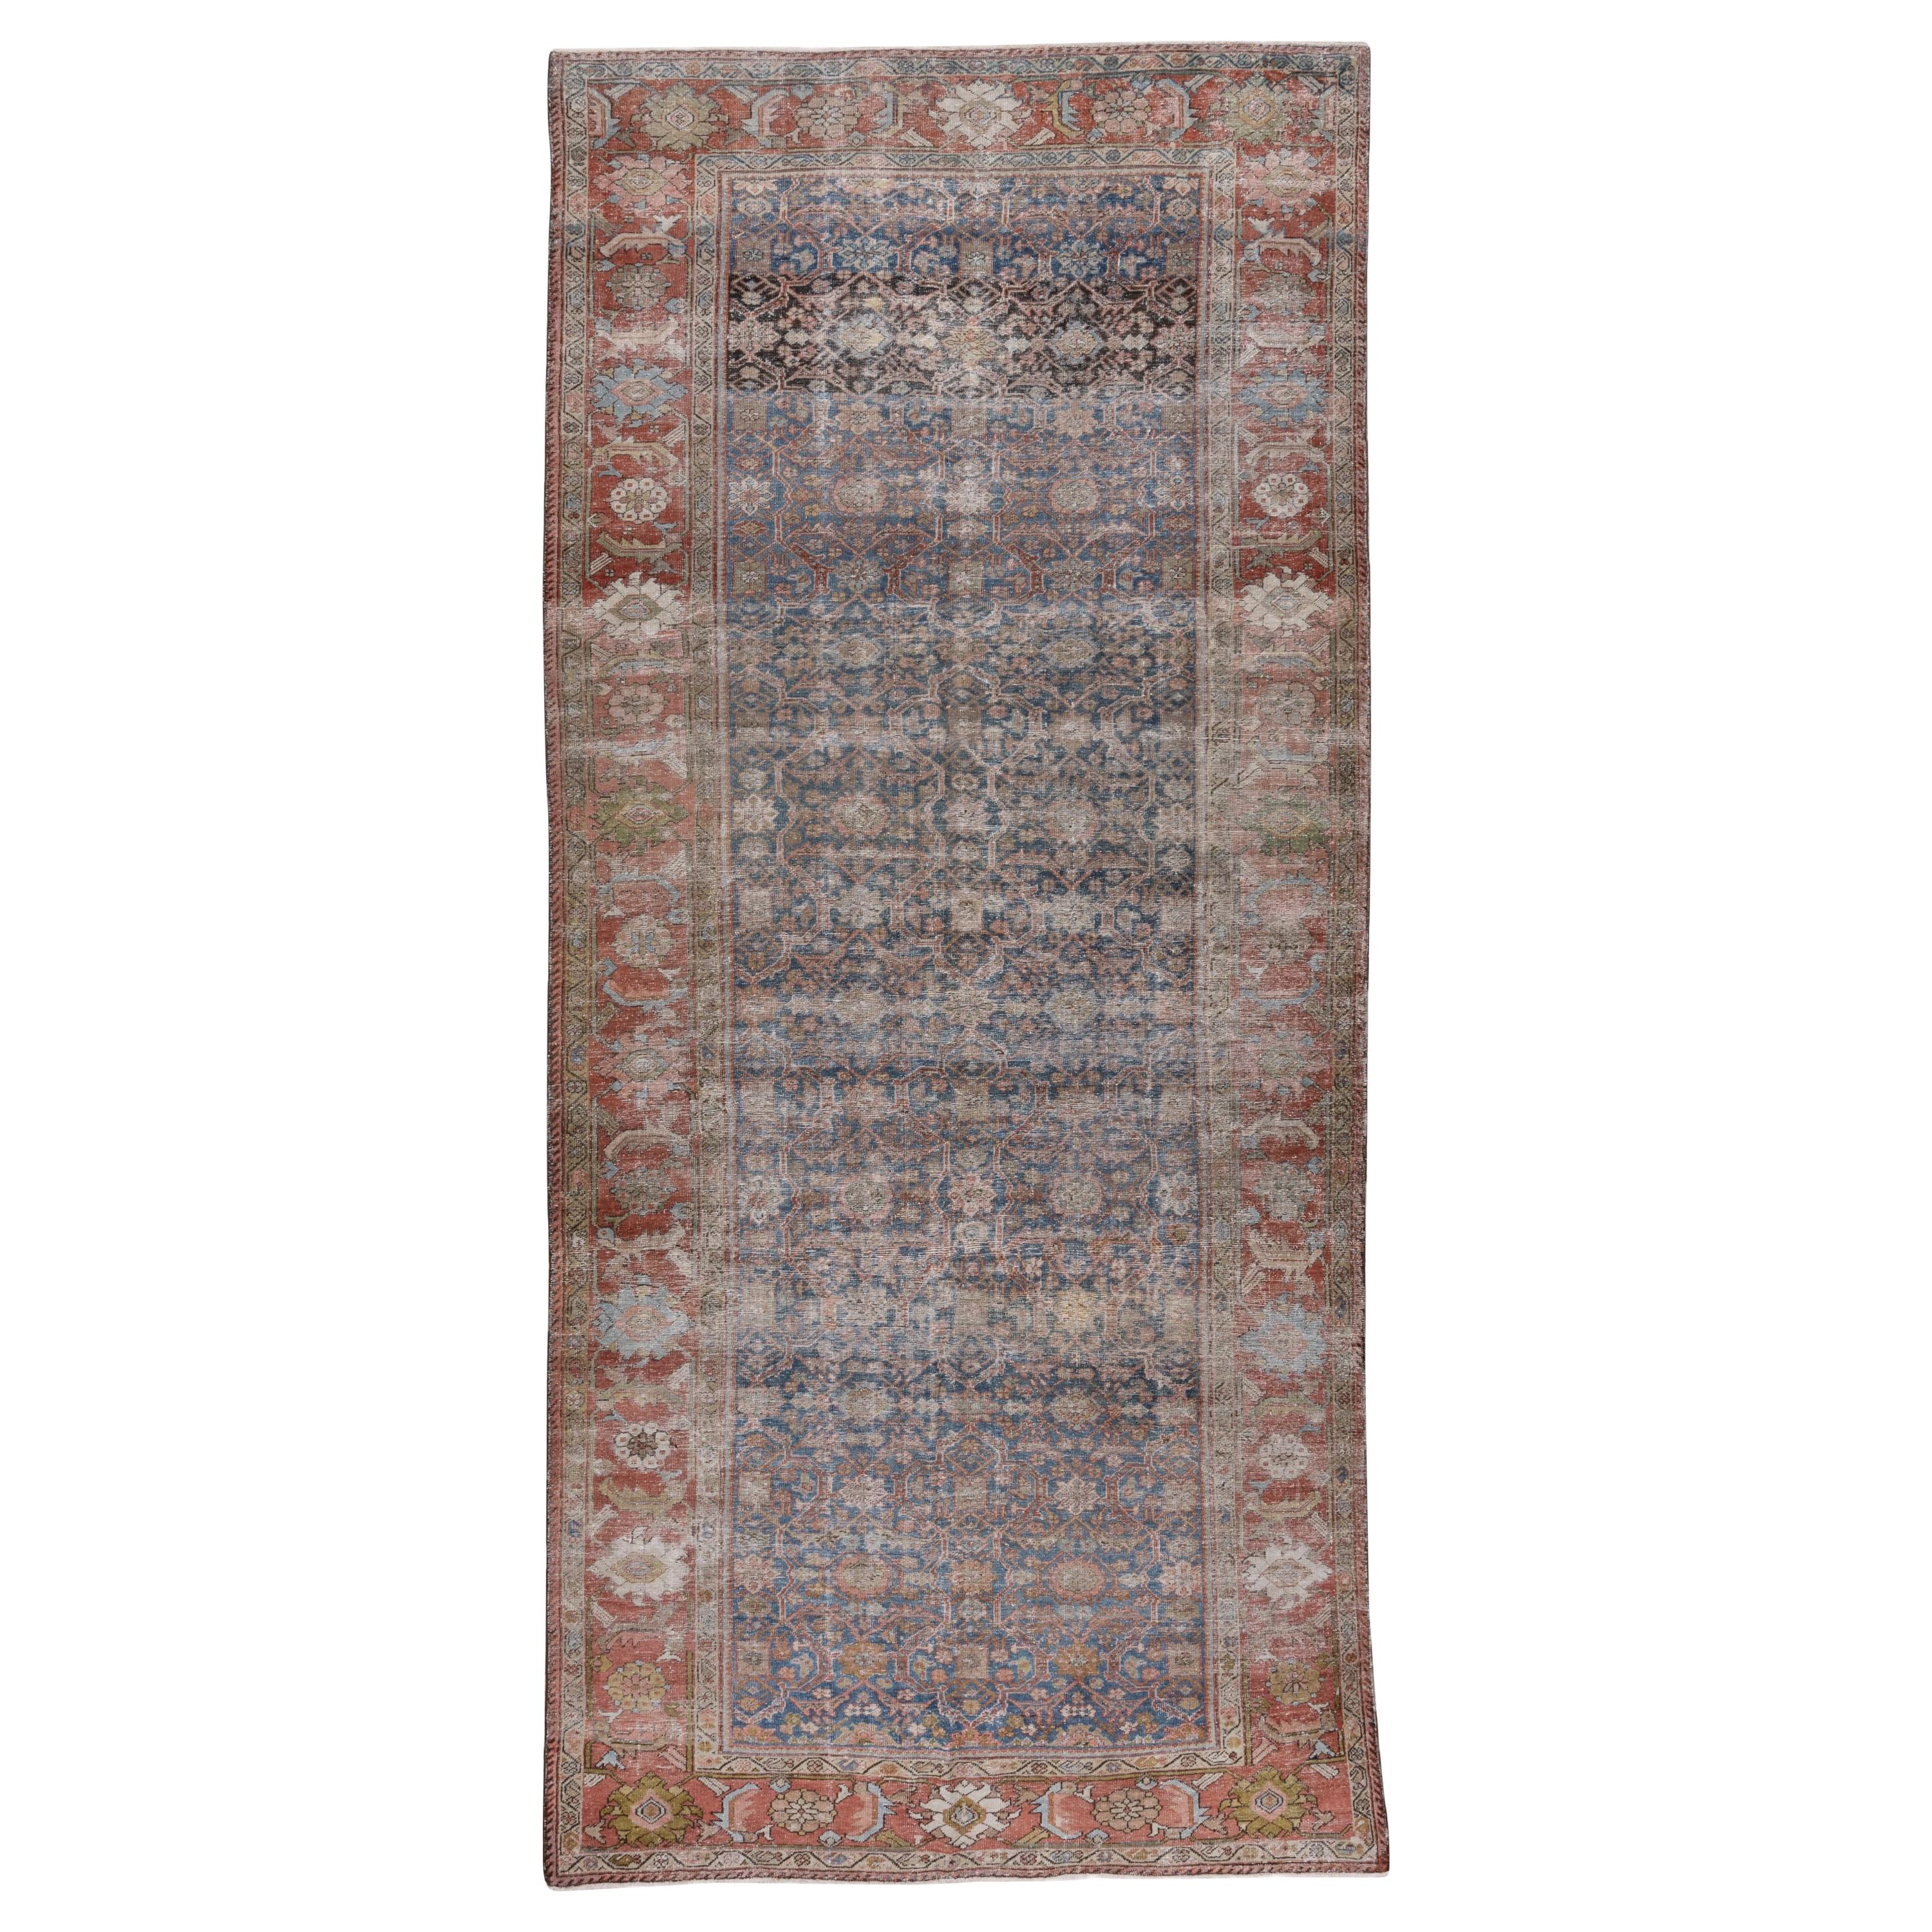 Antique Distressed Persian Mahal Carpet, Blue Field, Gallery Size For Sale